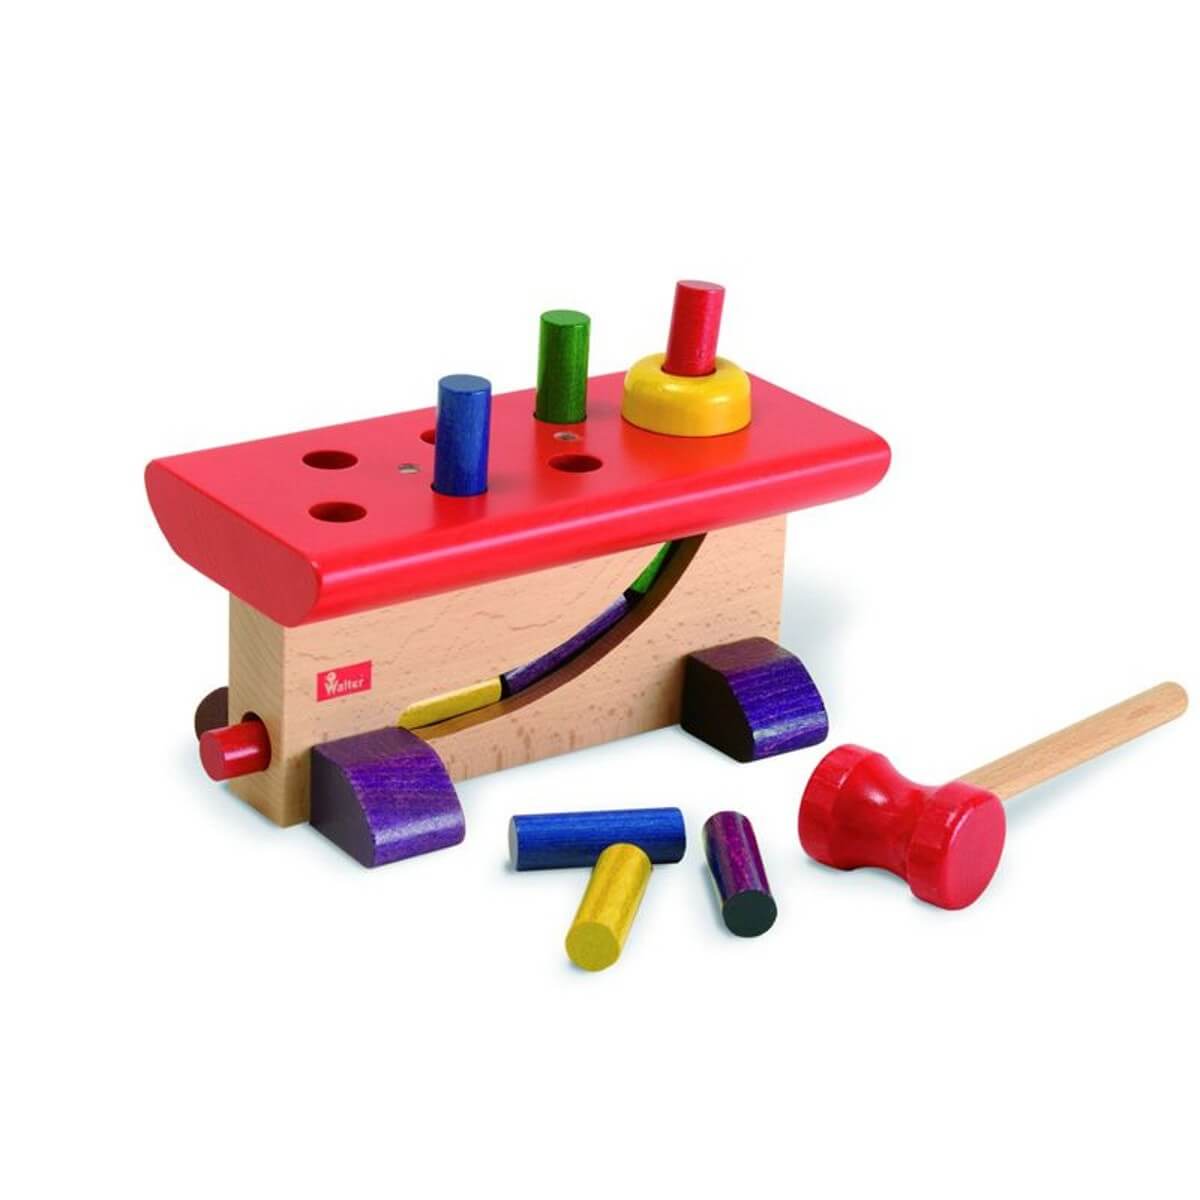 70464423 Walter Wooden Pounding Bench